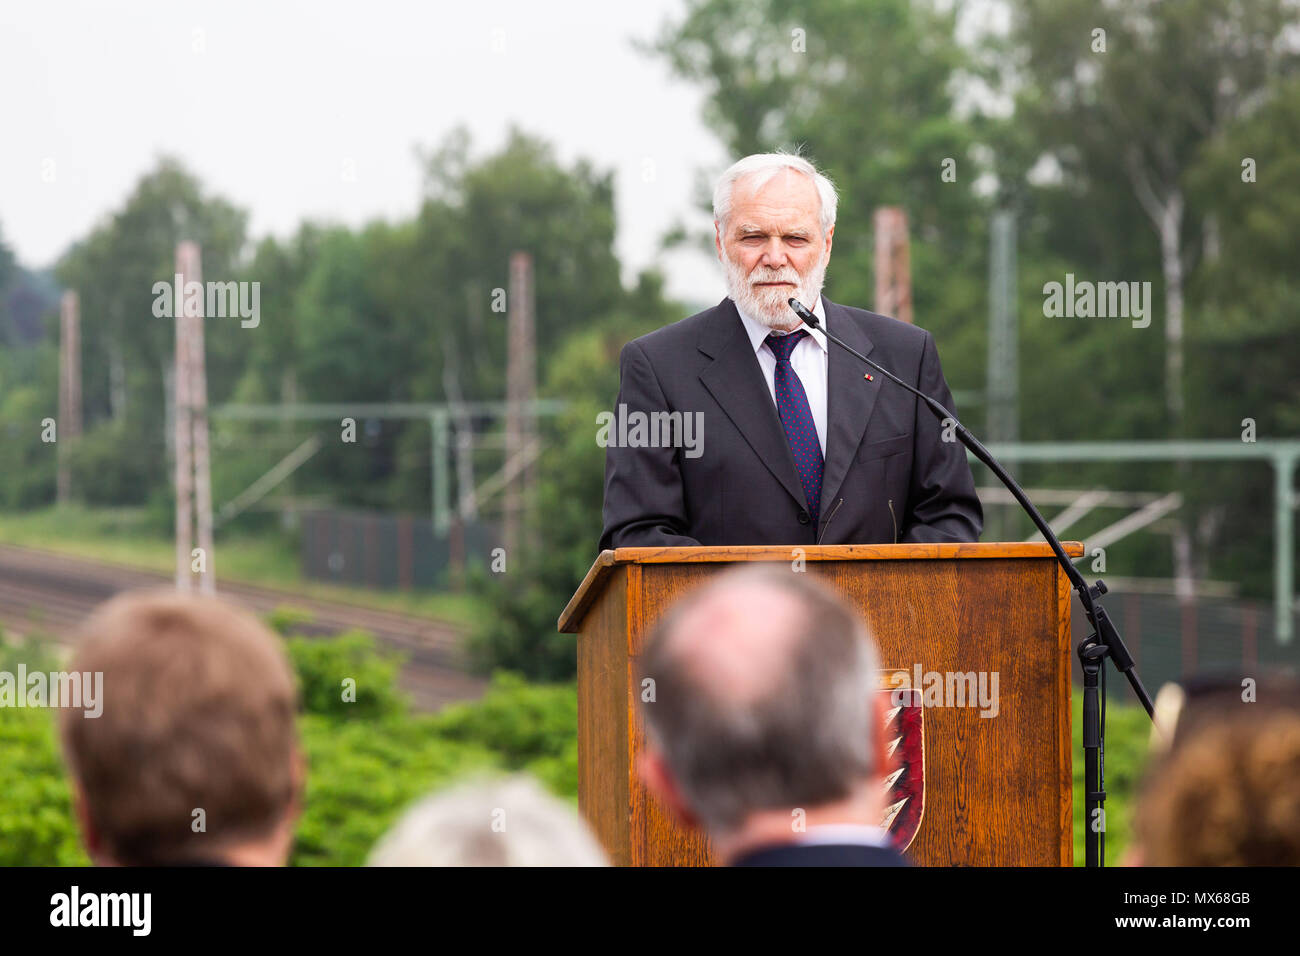 Eschede, Germany. 03 May 2018, Germany, Eschede: The spokesman from 'Selbsthilfe Eschede' (lit. self-help Eschede', Heinrich Loewen, speaking during the 20th anniversary of the train accident in Eschede. The ICE 'Wilhelm Conrad Roentgen' derailed on the 3 June 1998 at tempo 200 and drove into a highway bridge. 101 people died. Photo: Philipp von Ditfurth/dpa Stock Photo